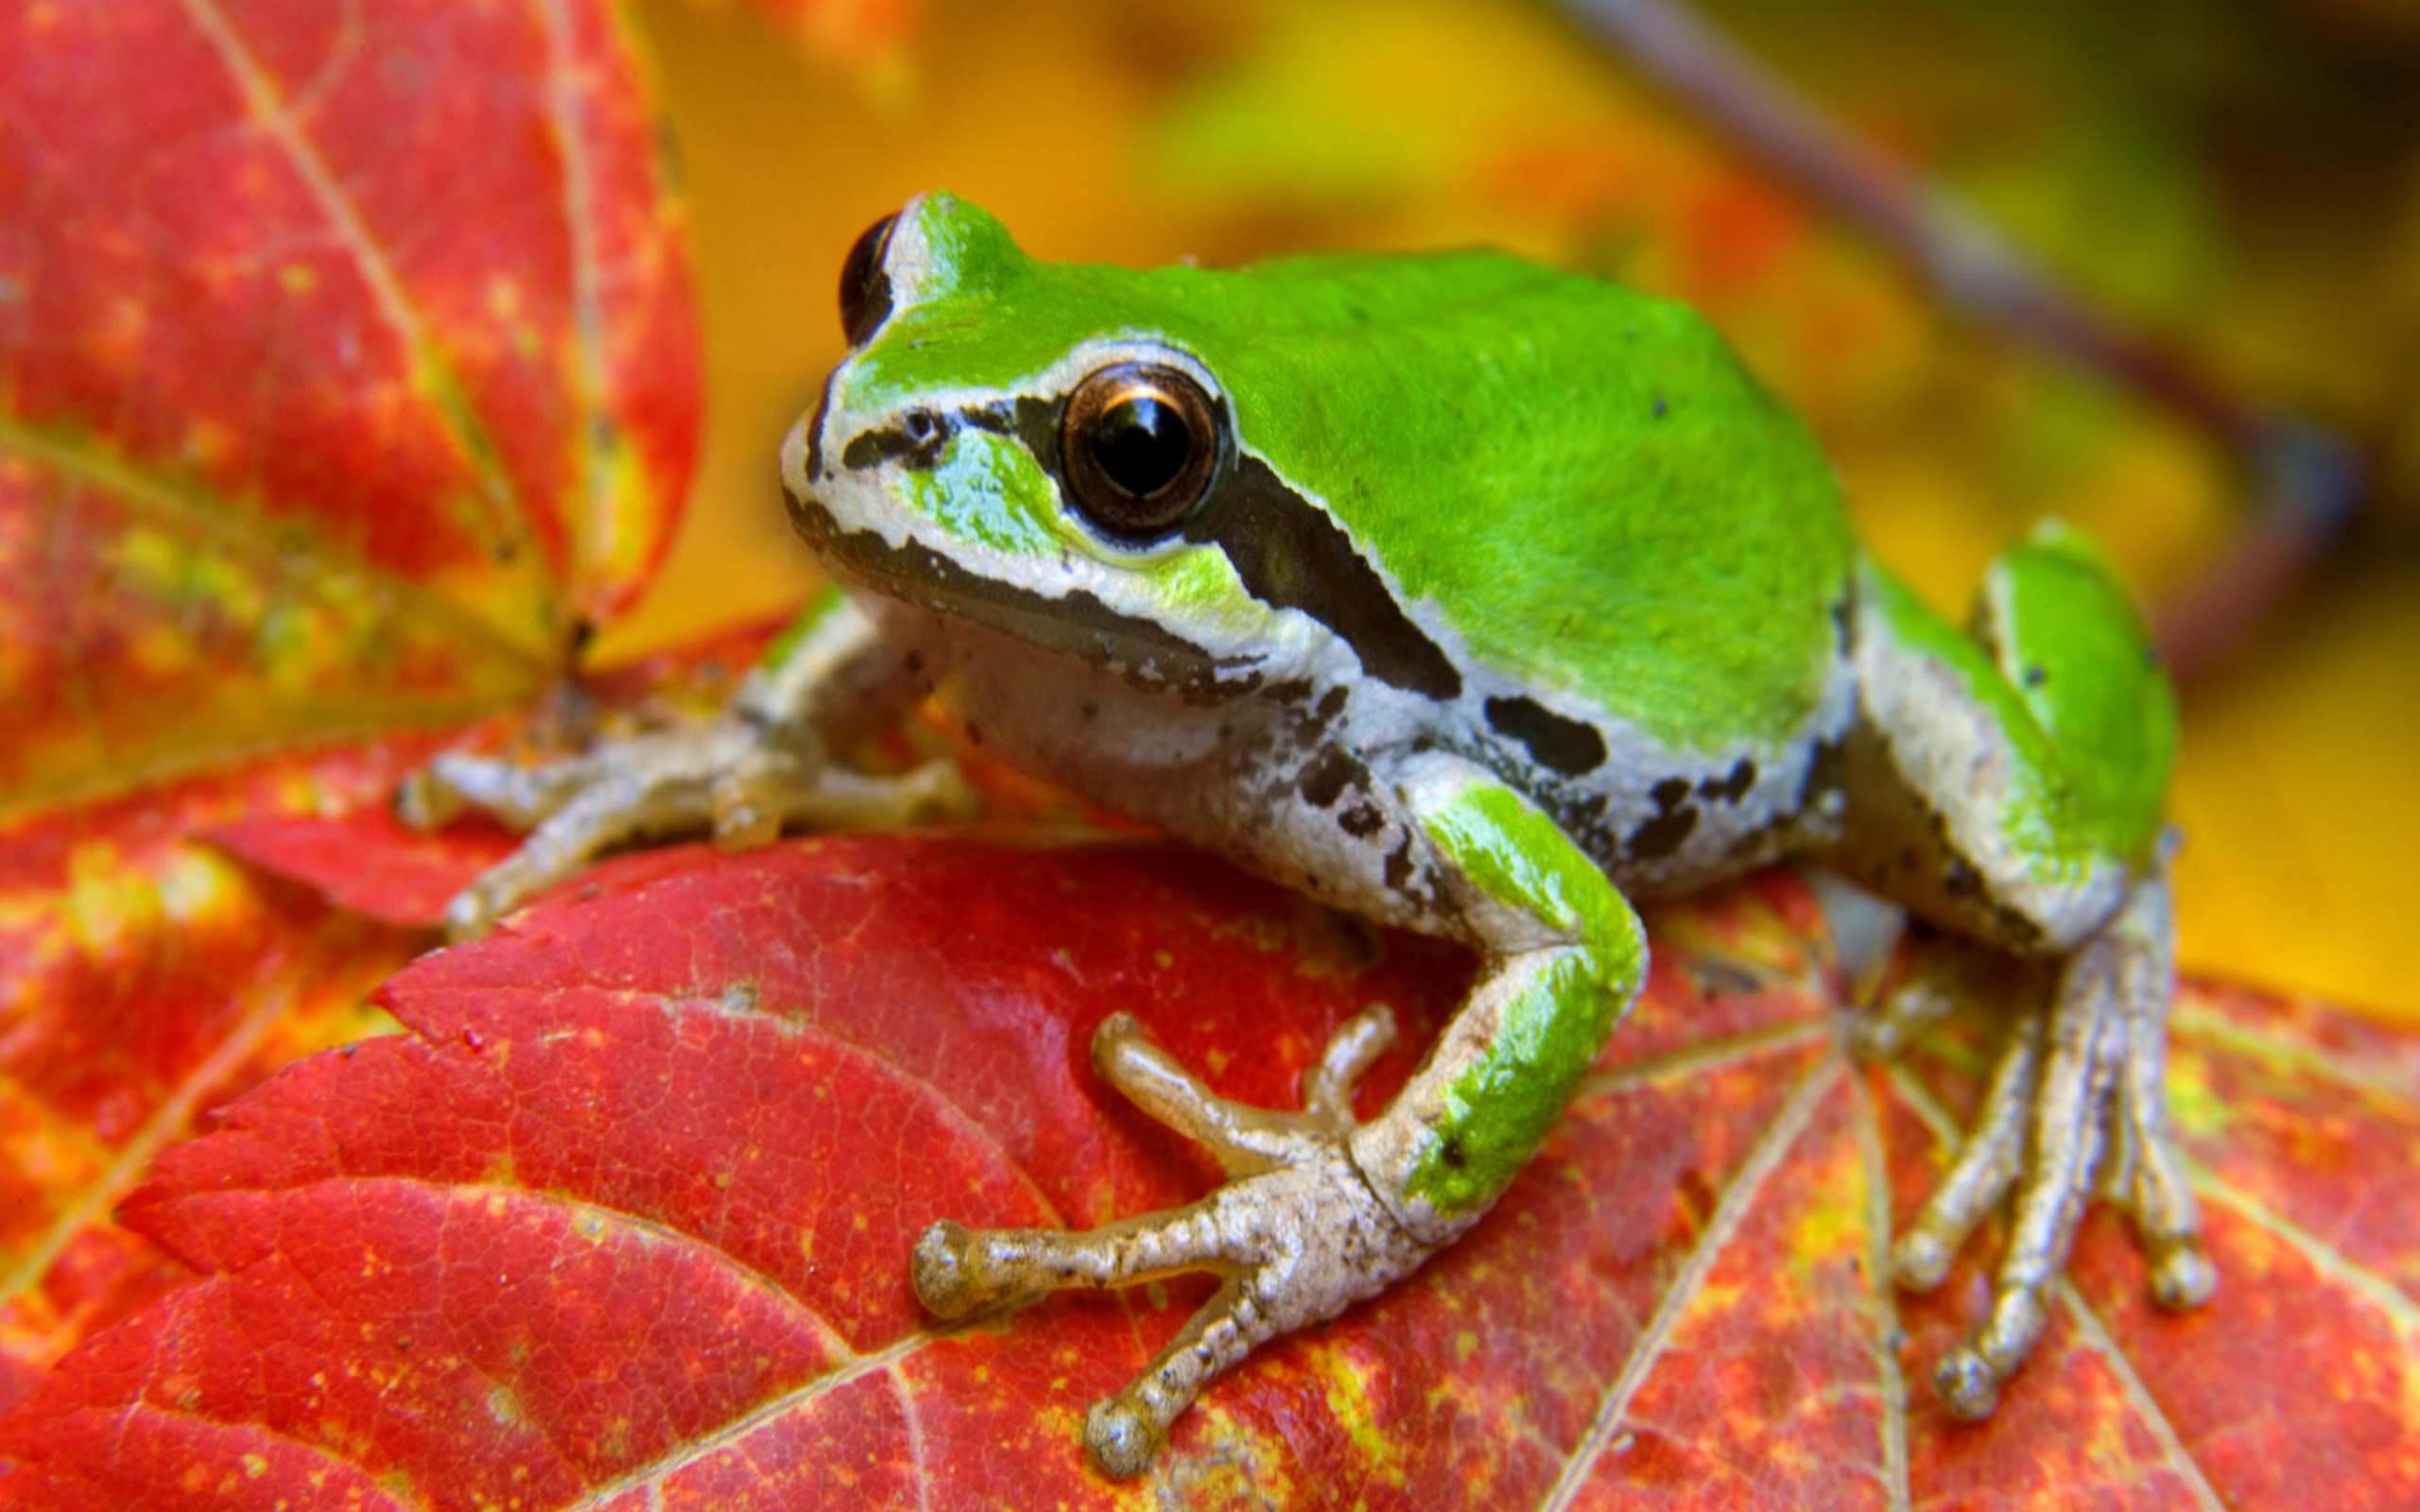 Frog on a colorful autumn leaf in Olympic National Park, Washington by Don Paulson.